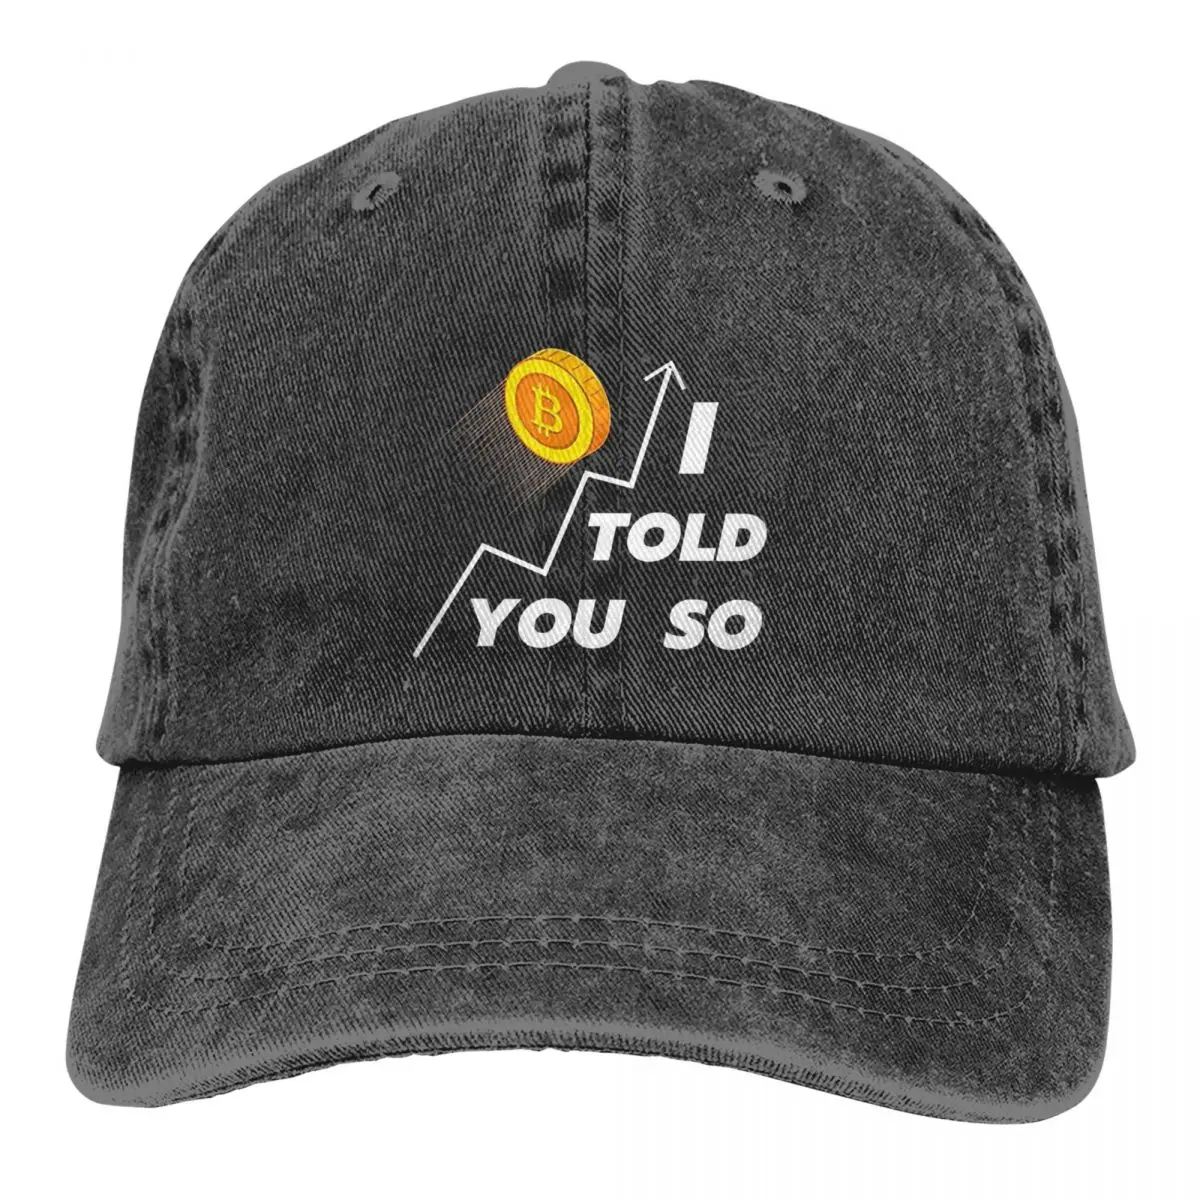 

Bitcoin Cryptocurrency Art Multicolor Hat Peaked Women's Cap I Told You So BTC Personalized Visor Protection Hats